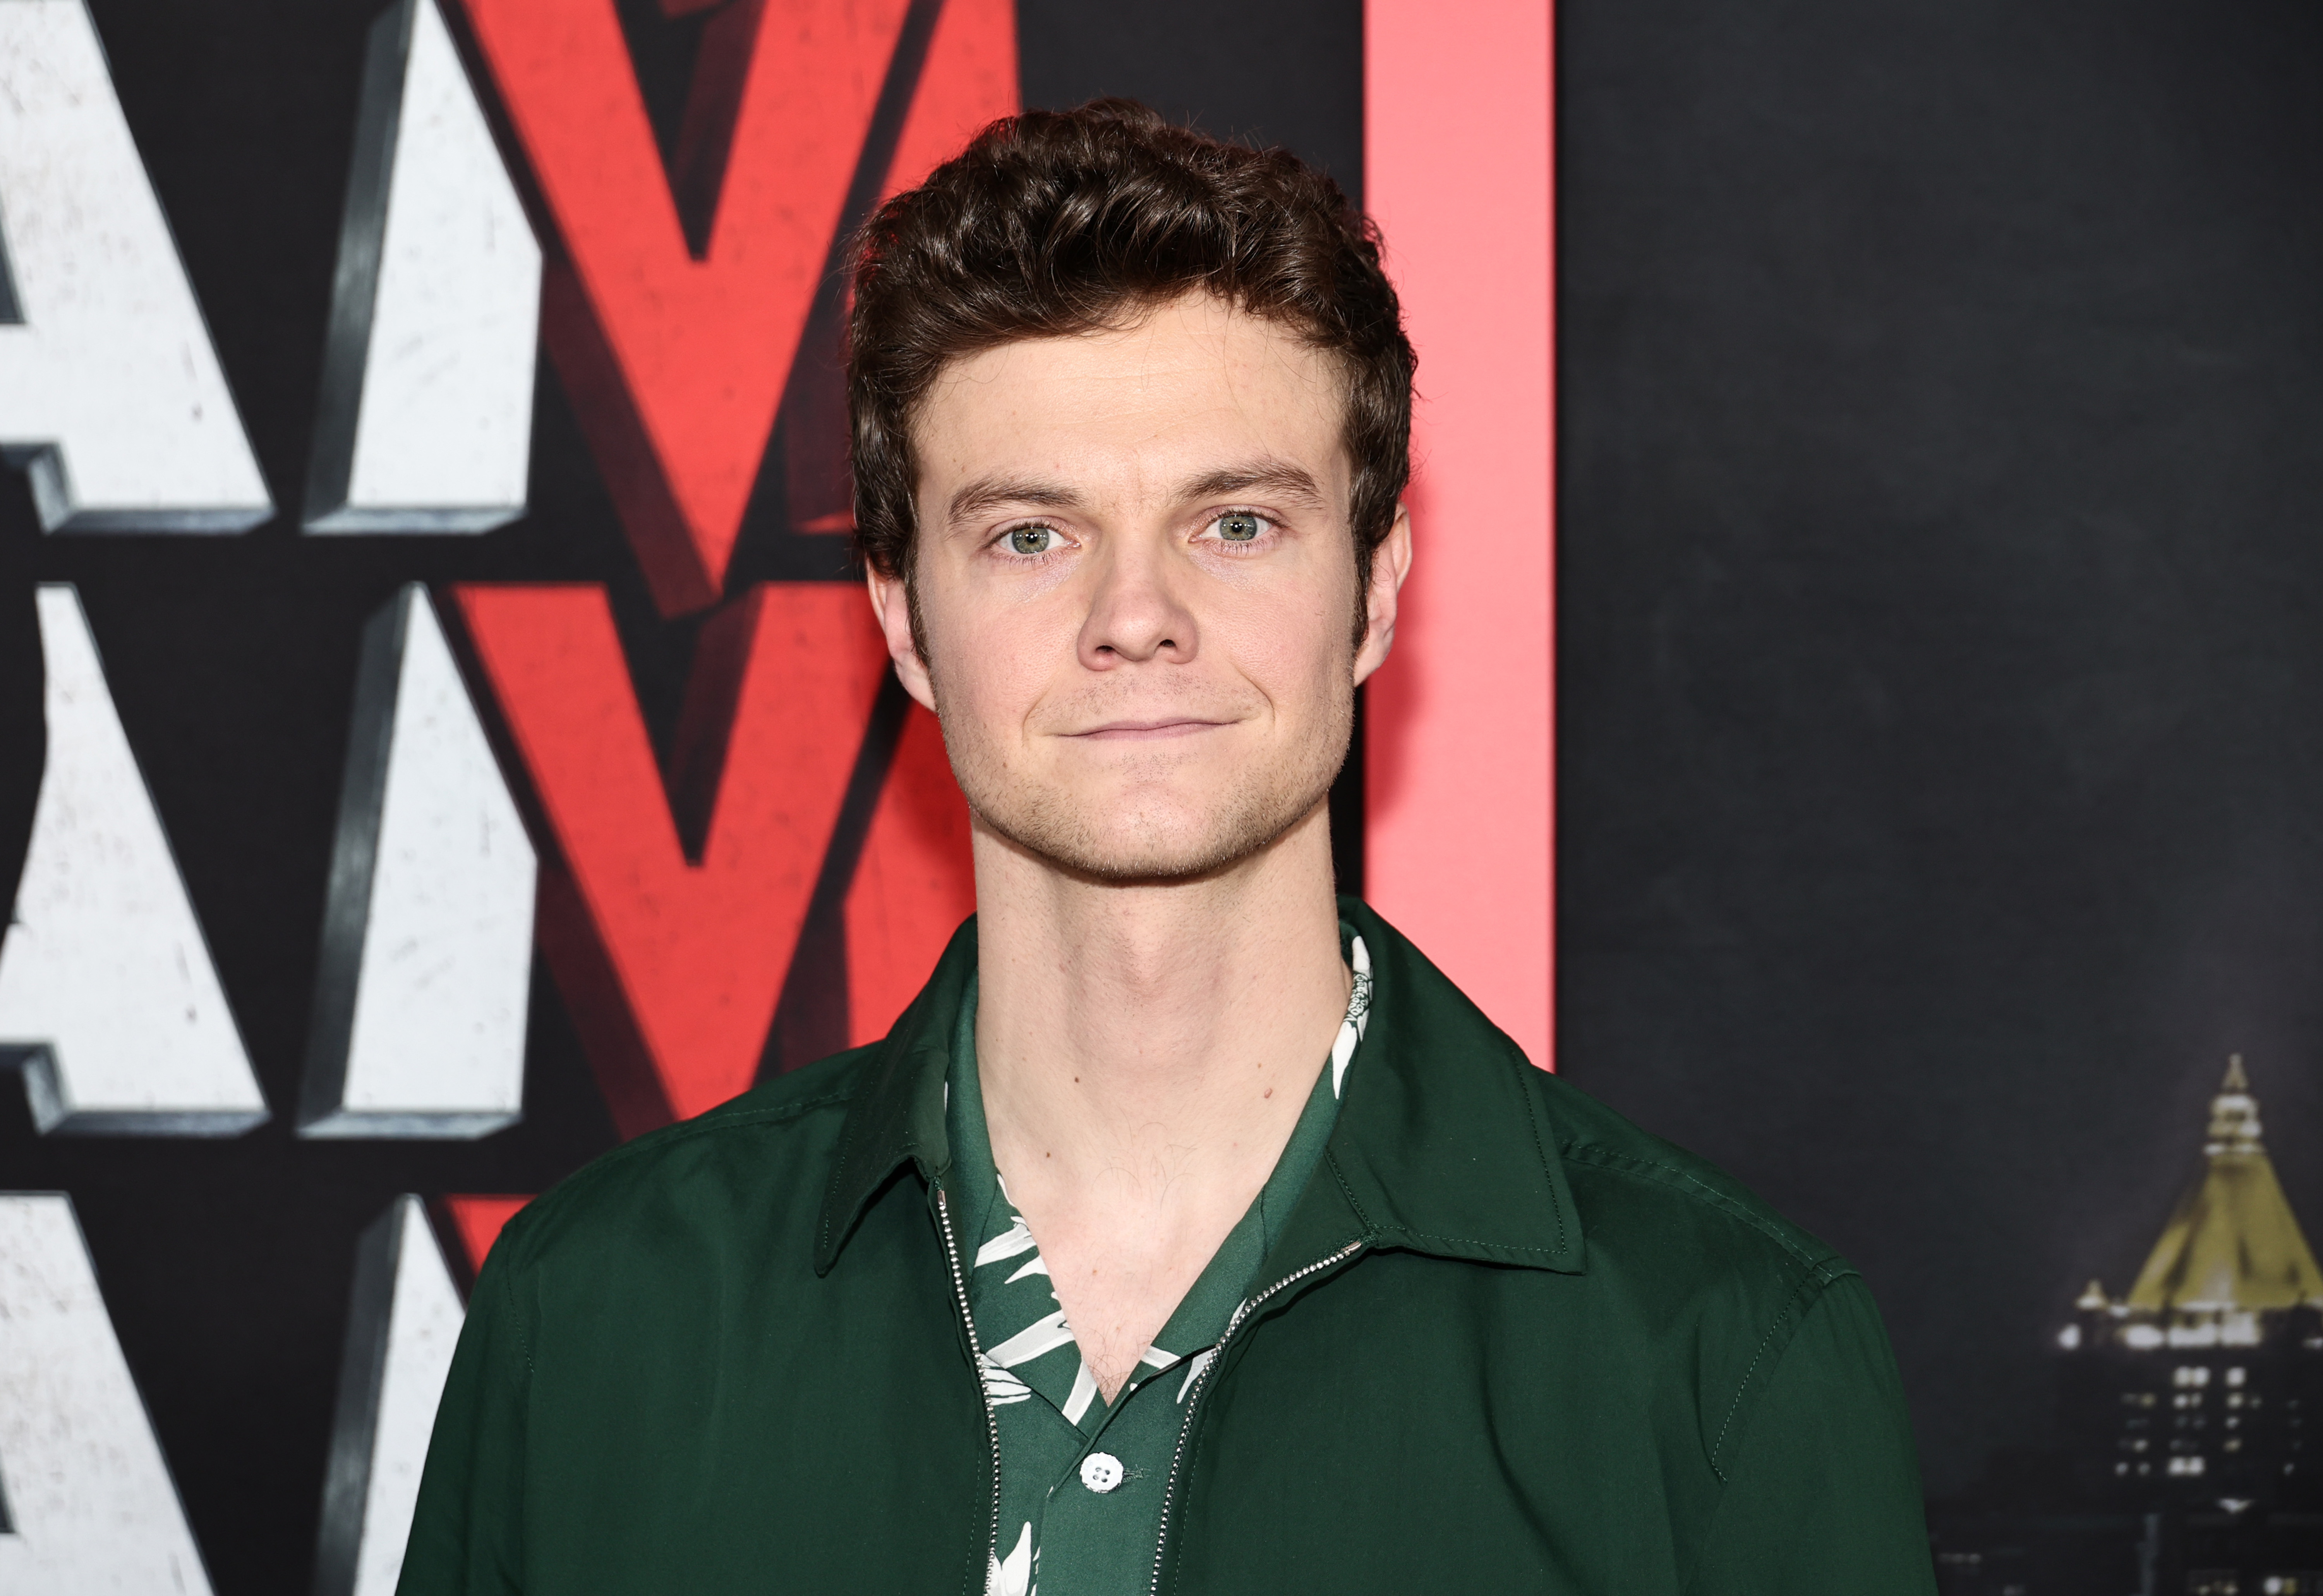 Jack Quaid at the world premiere of "Scream VI" at AMC Lincoln Square Theater in New York City on March 06, 2023. | Source: Getty Images